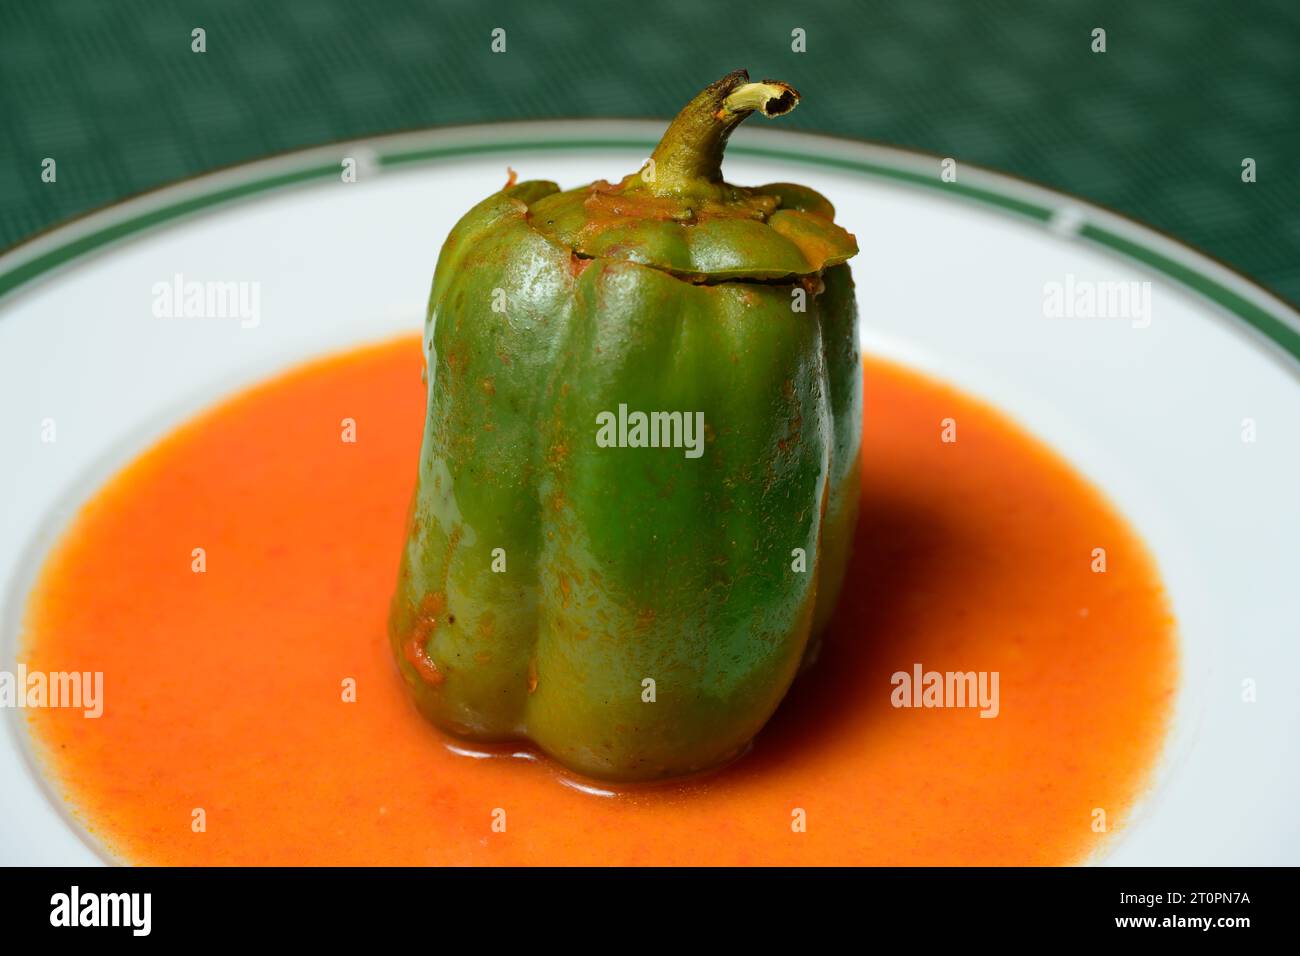 Stuffed Green Bell Pepper or Gefullte Paprika with Tomato Sauce Austrian Style Stock Photo